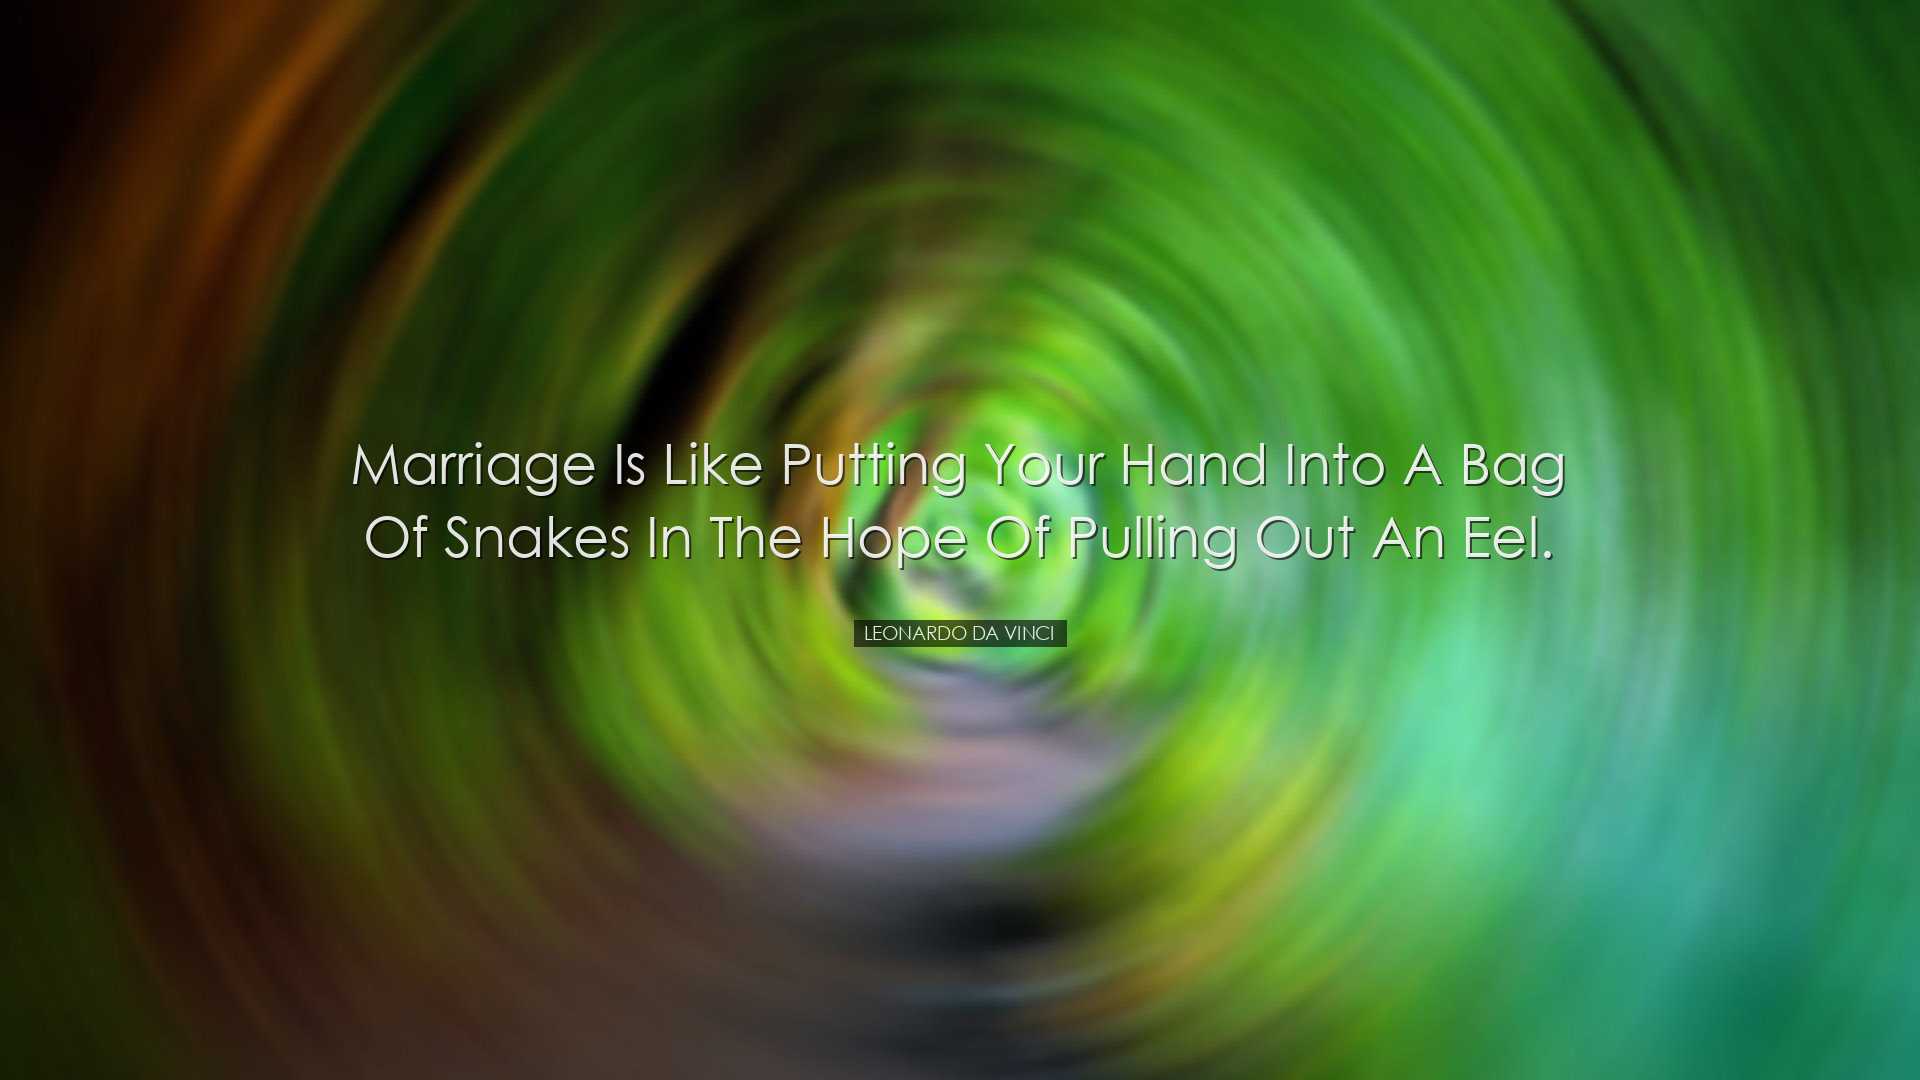 Marriage is like putting your hand into a bag of snakes in the hop